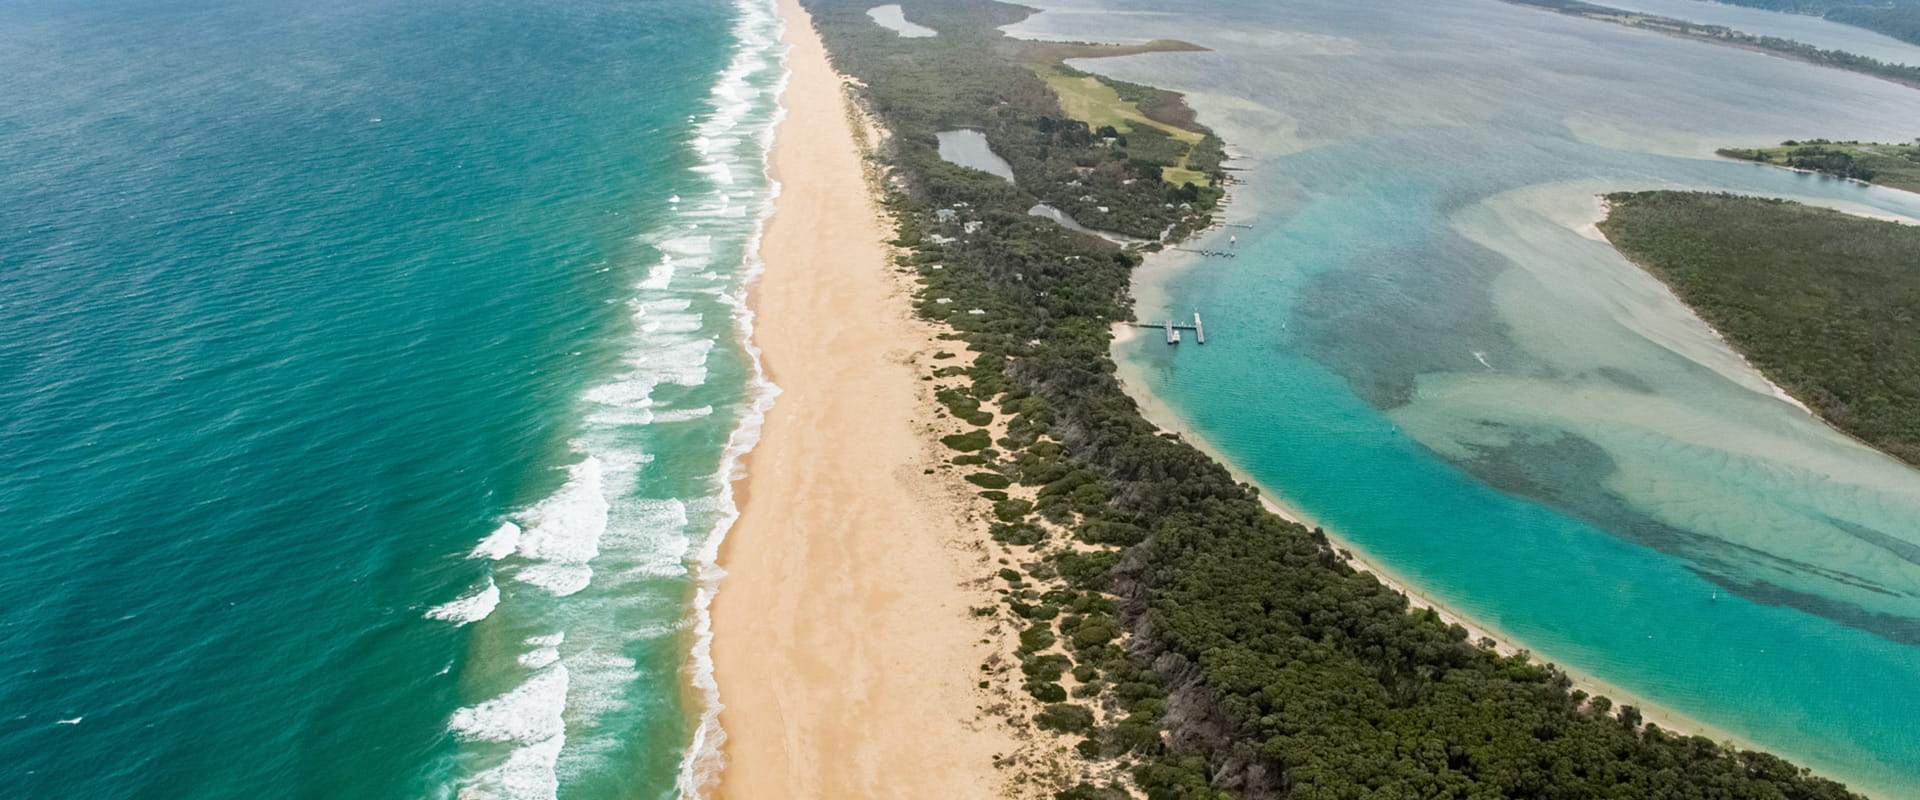 An aerial view that looks down at a secluded stretch of coastline with dunes and coastal shrubbery that seperate the beach from an expansive coastal river system.